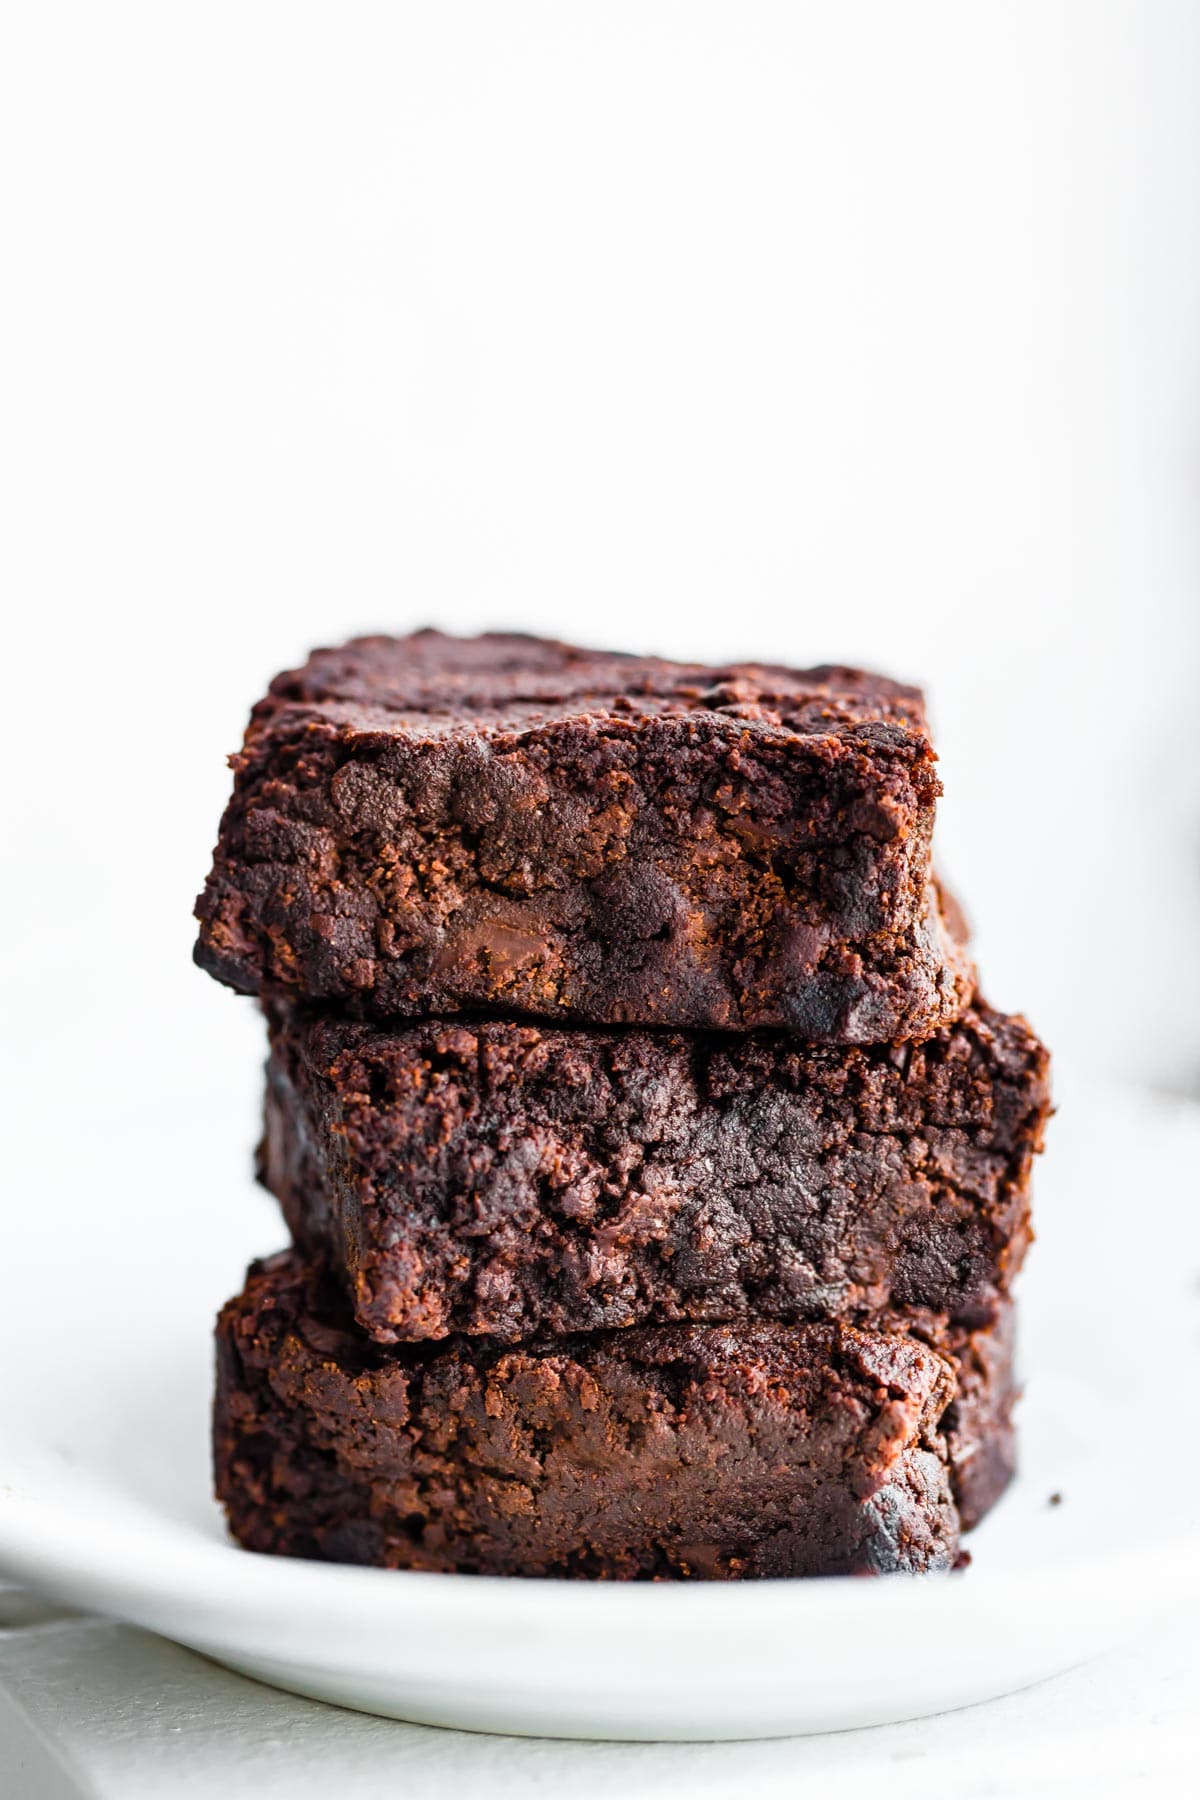 Three dark chocolate gluten-free brownies stacked up on a white plate.